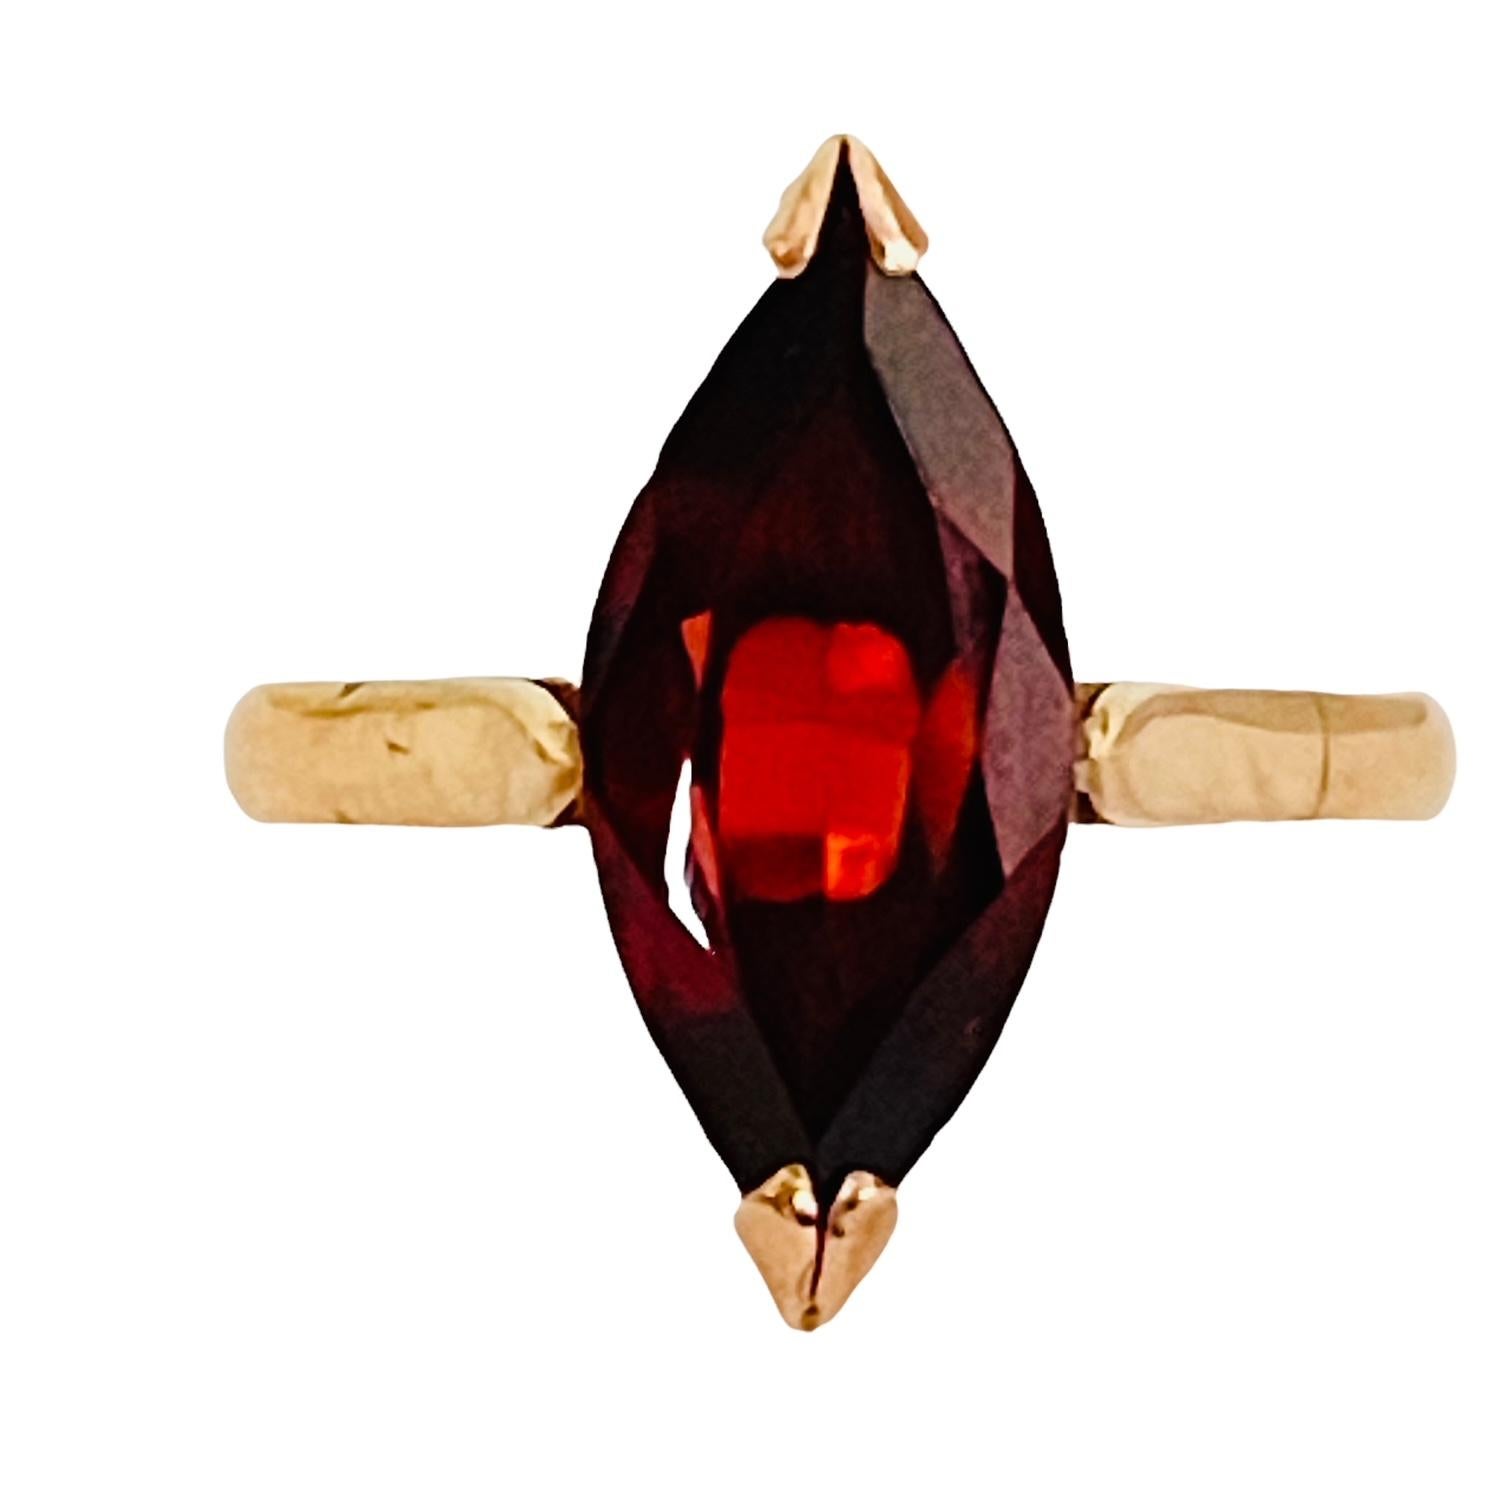 Attached is a Retail Appraisal for the secondary jewelry market.  This is not for insurance replacement value which would be much higher than this.

14K YG Garnet Ring – Prong Set

1 Marquis Woman’s Garnet Ring
Measuring 15.1mm x 6.7mm 

Mounting